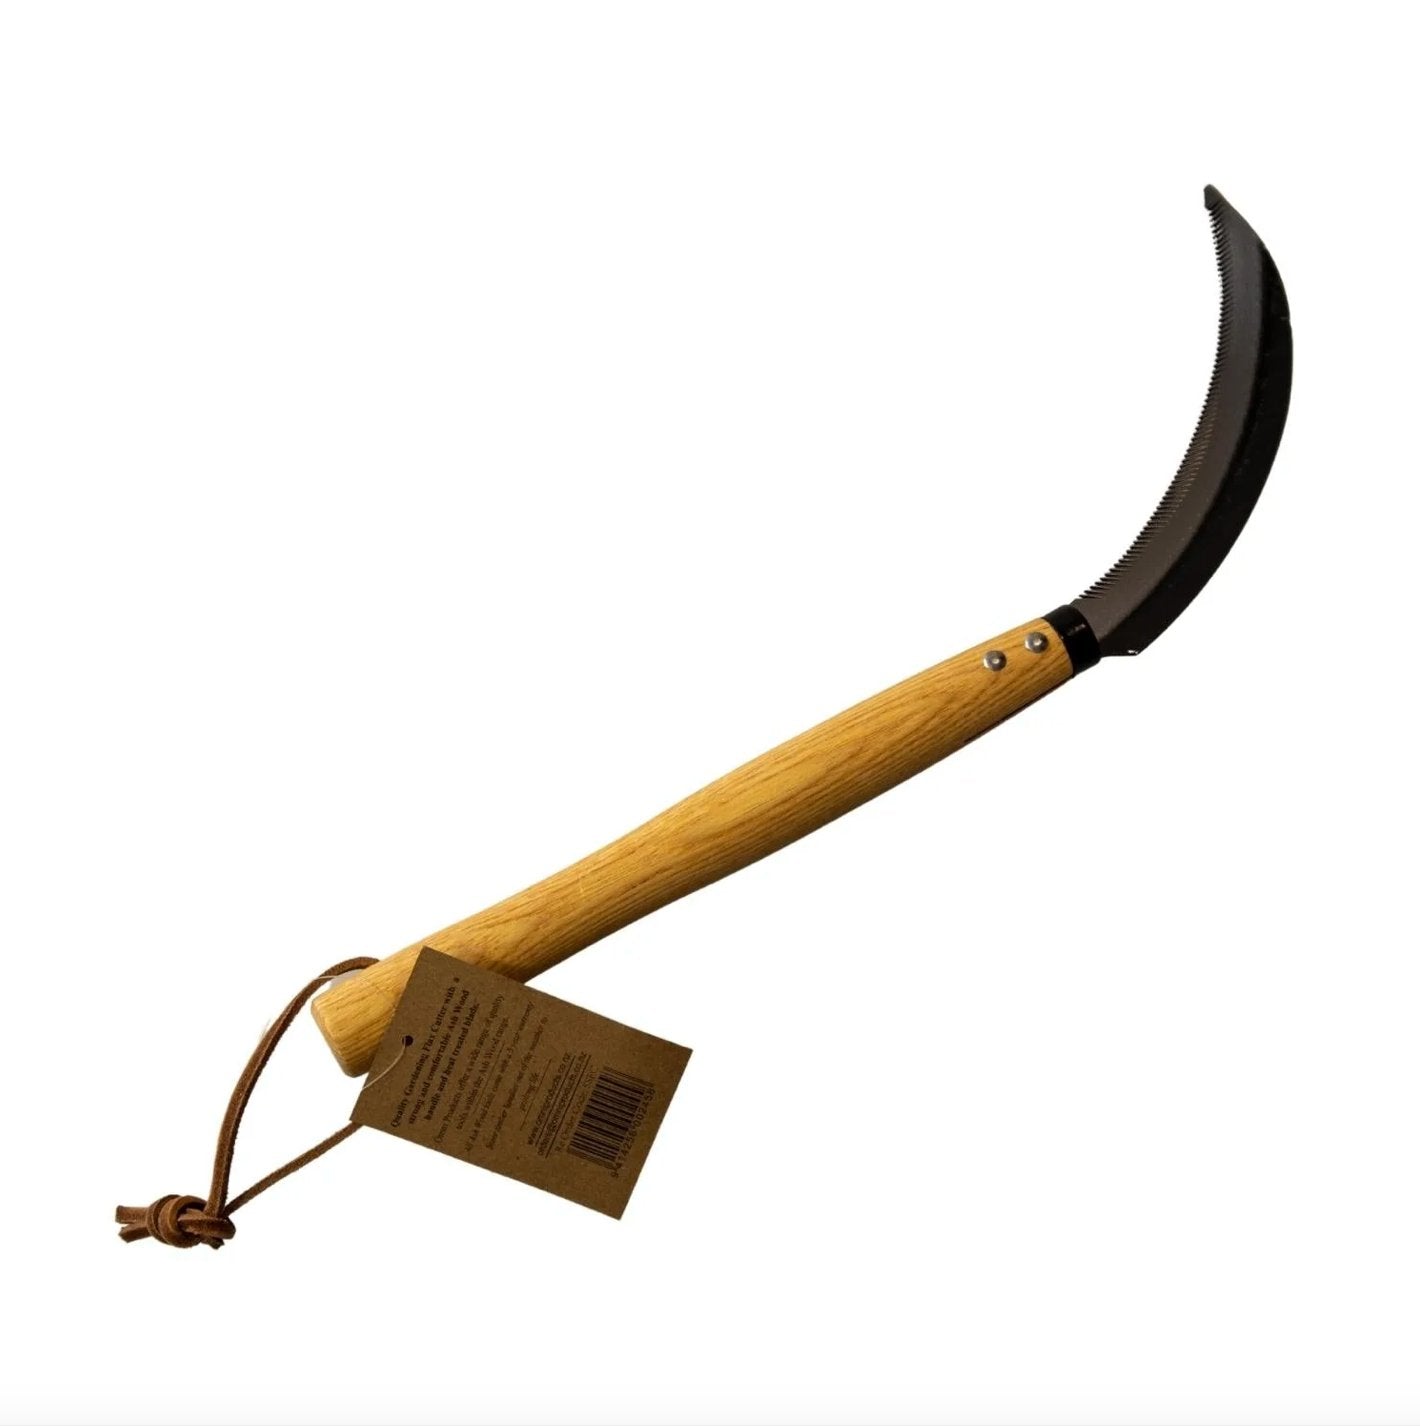 Omni Hand Held Flax Cutter - The Flower Crate